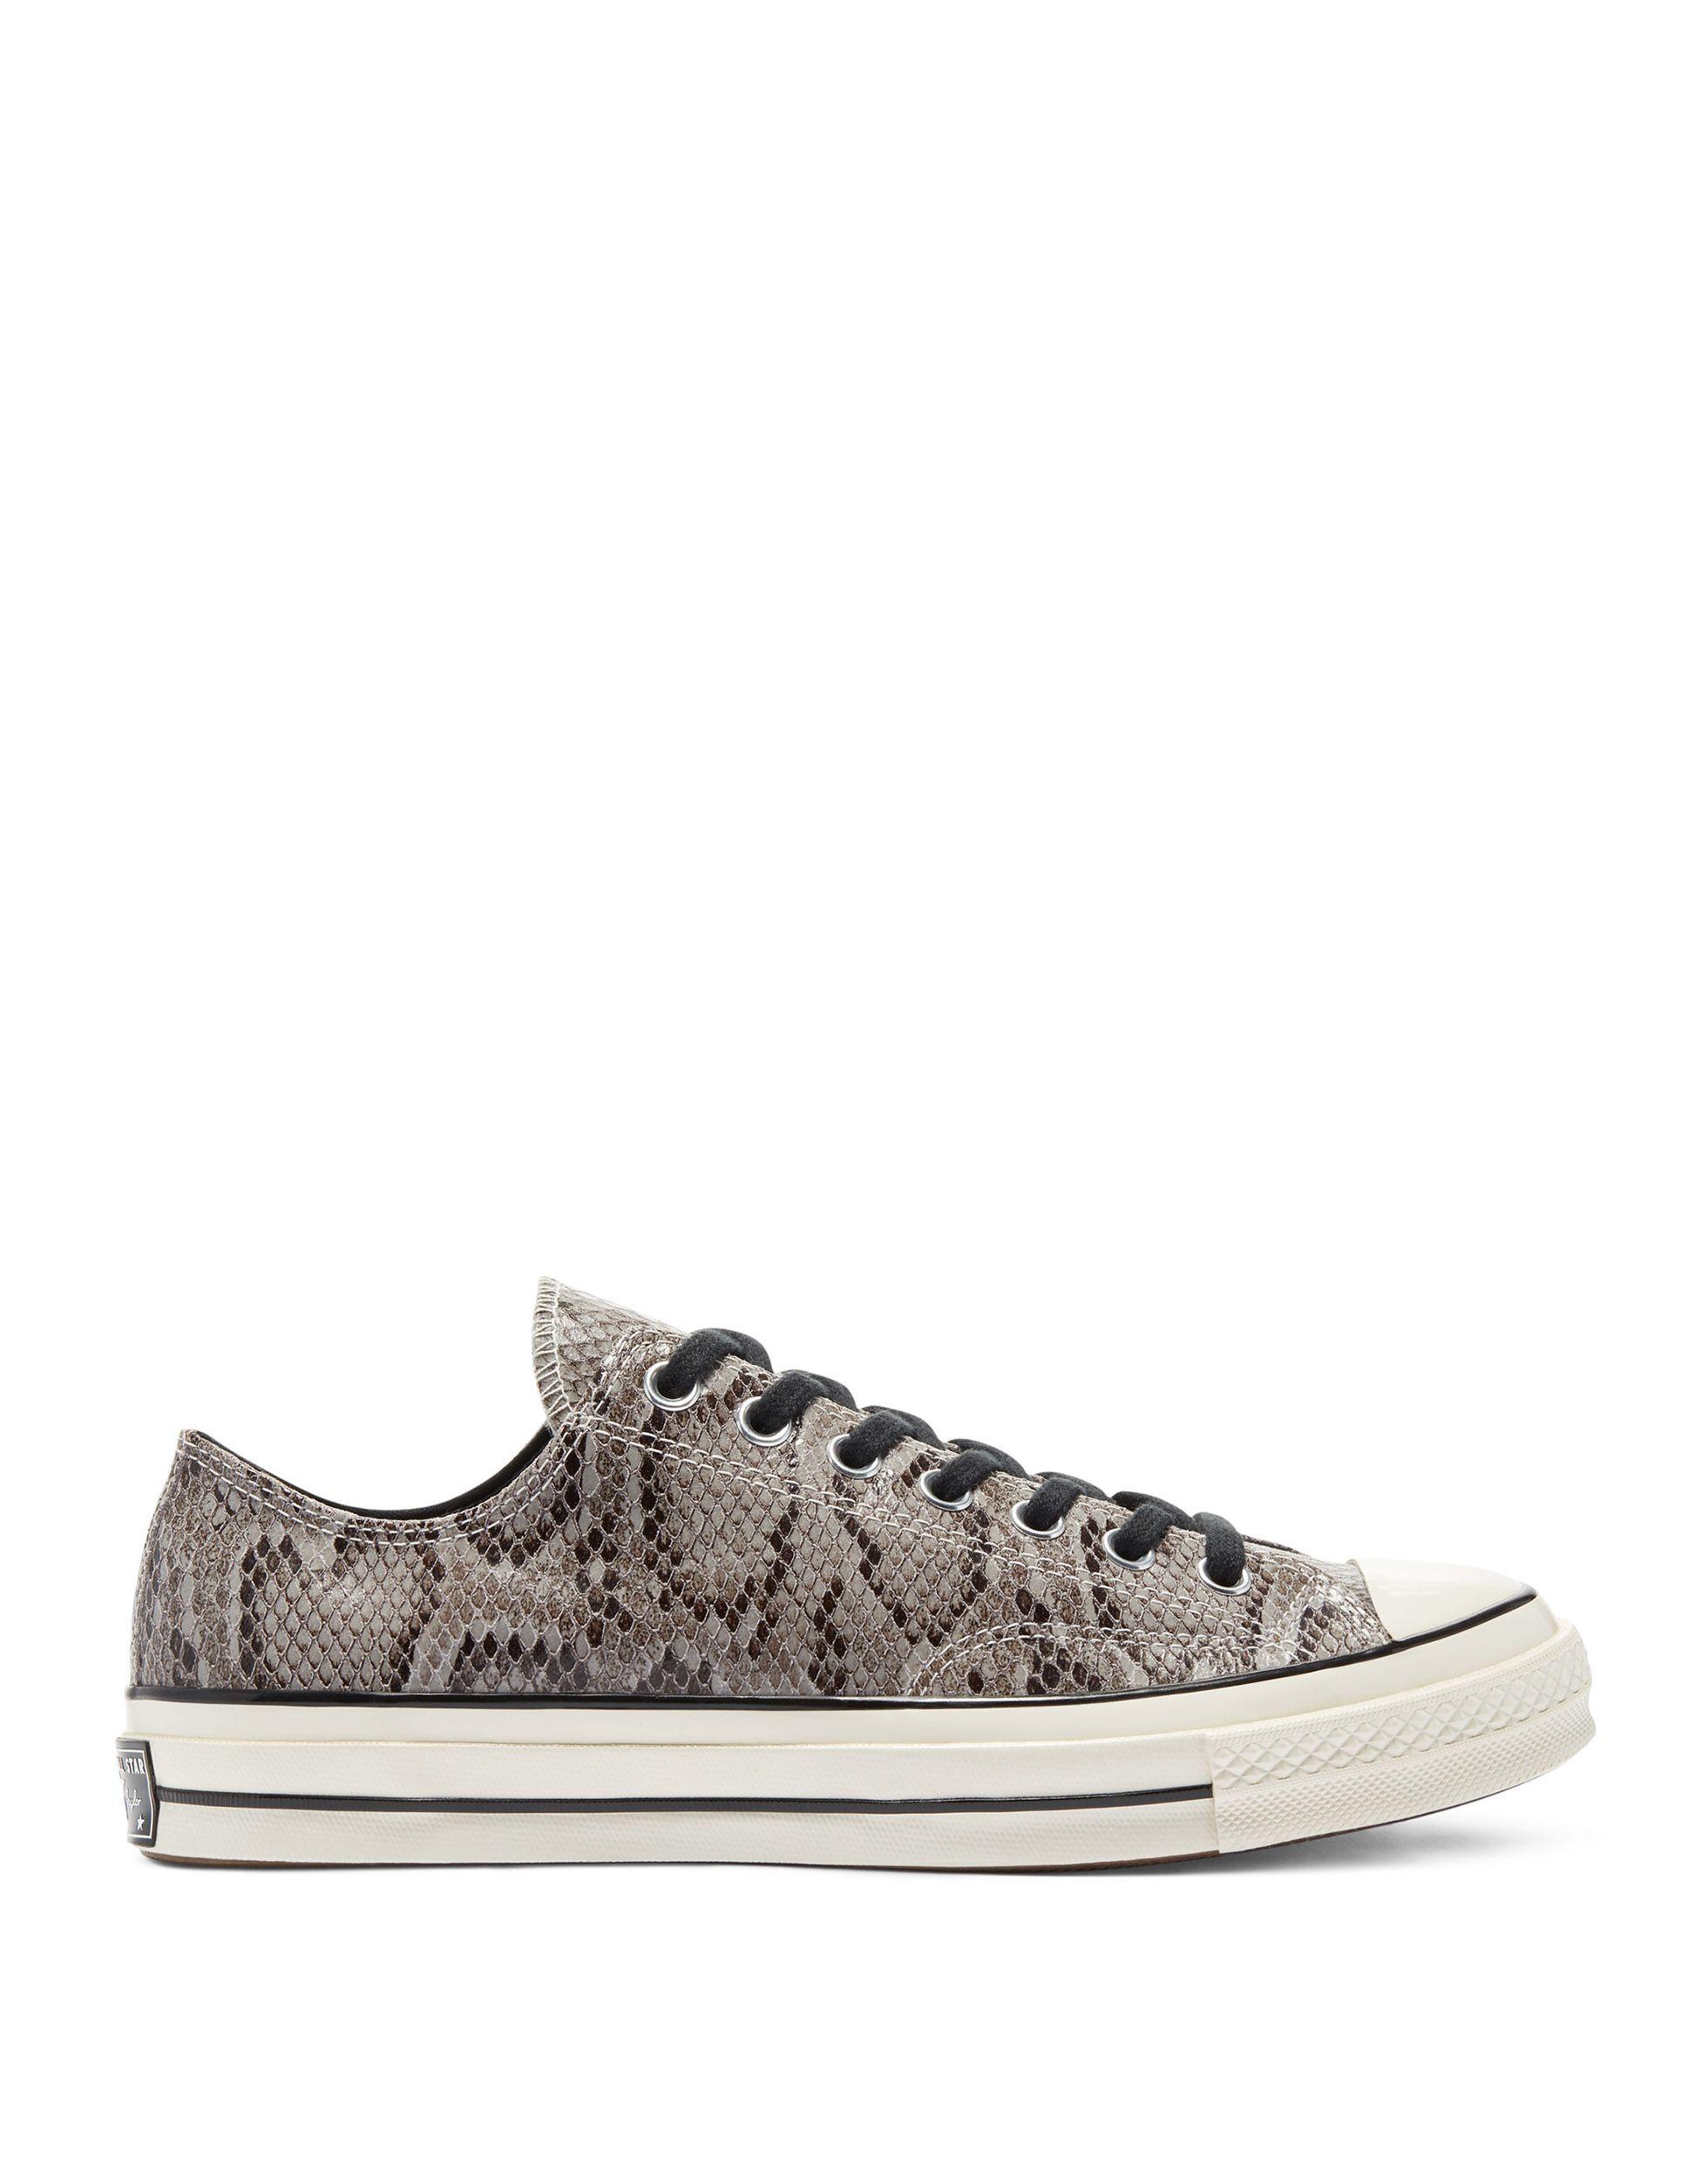 Converse Chuck 70 Low Archive Reptile Snake Print Leather Sneakers in Grey  (Gray) | Lyst